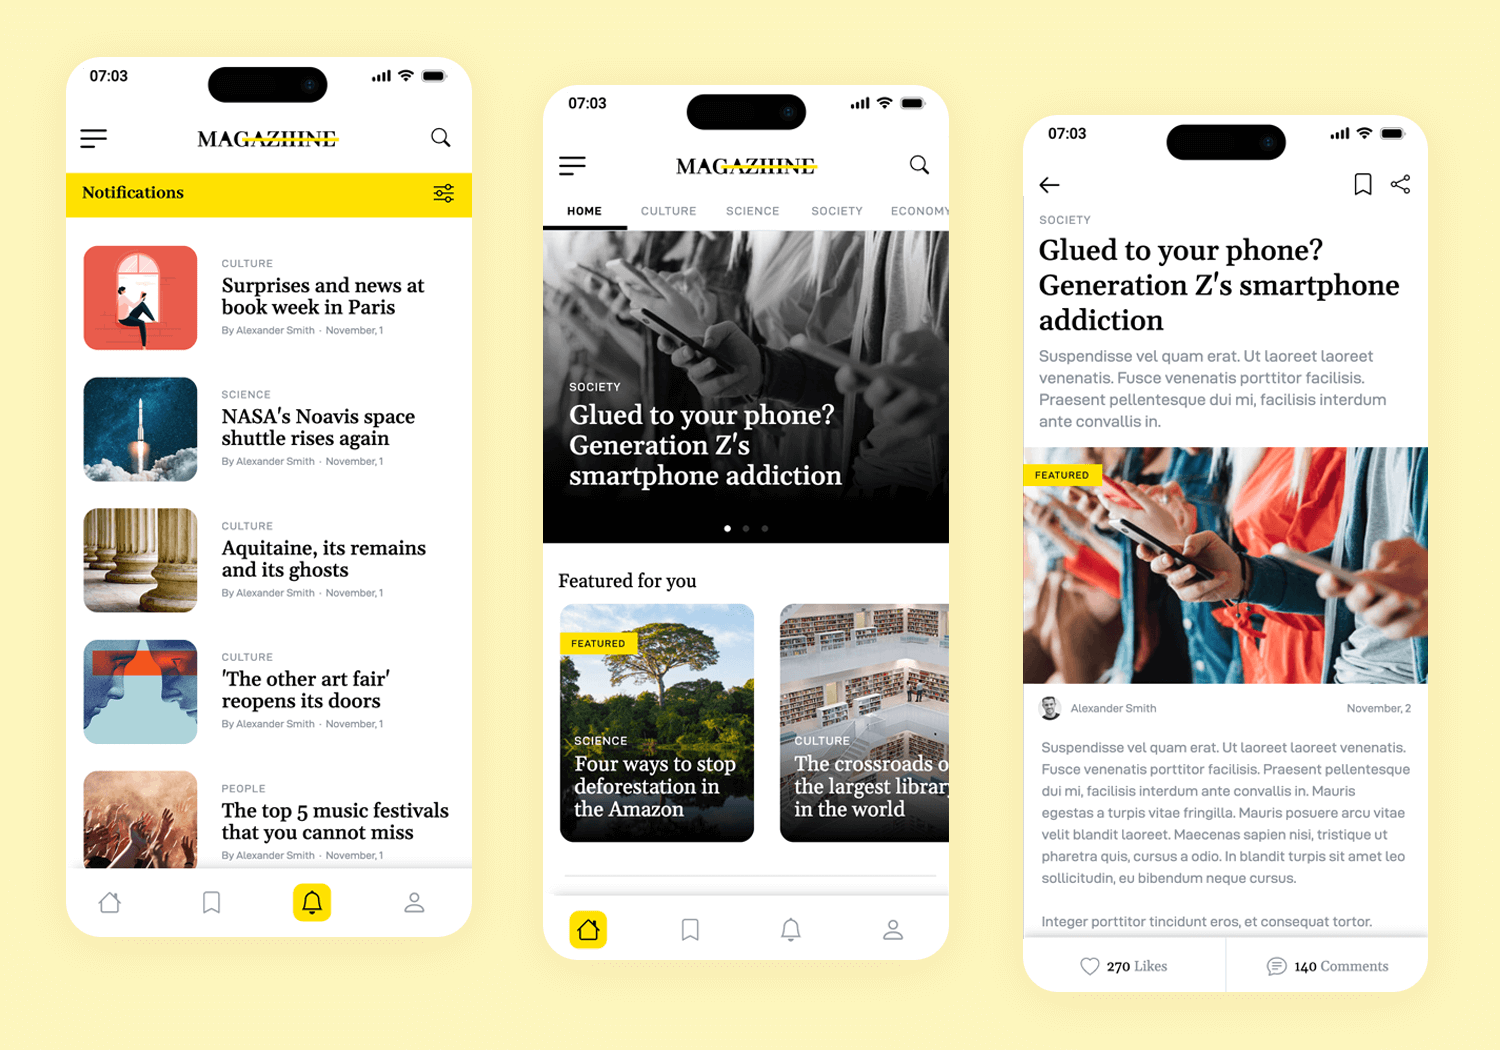 Mobile magazine app mockup showcasing a clean and user-friendly interface with categorized content display.